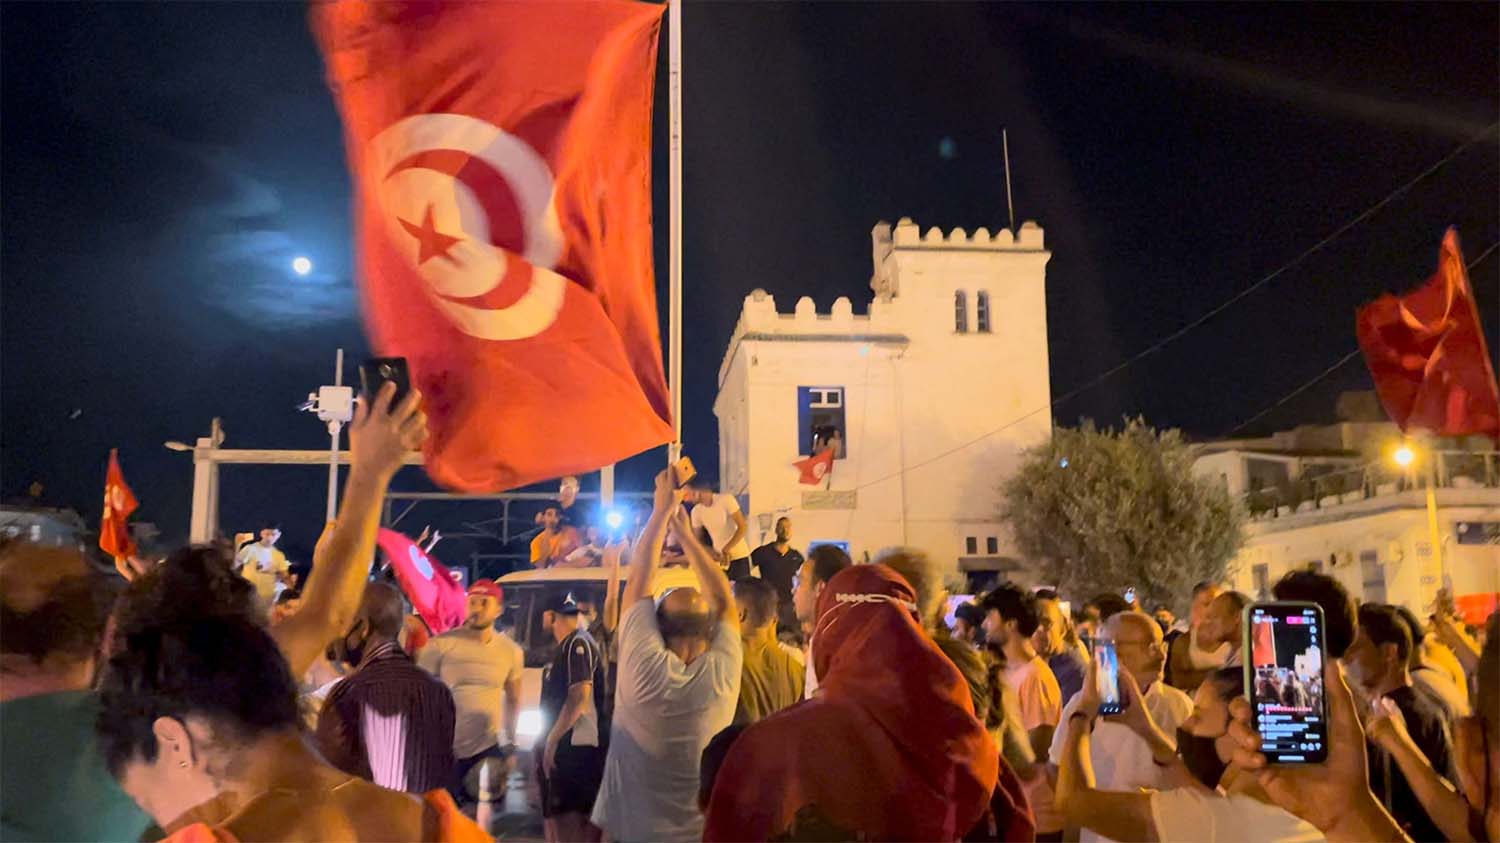 Tunisians defied the COVID-19 curfew to celebrate Saied's decision